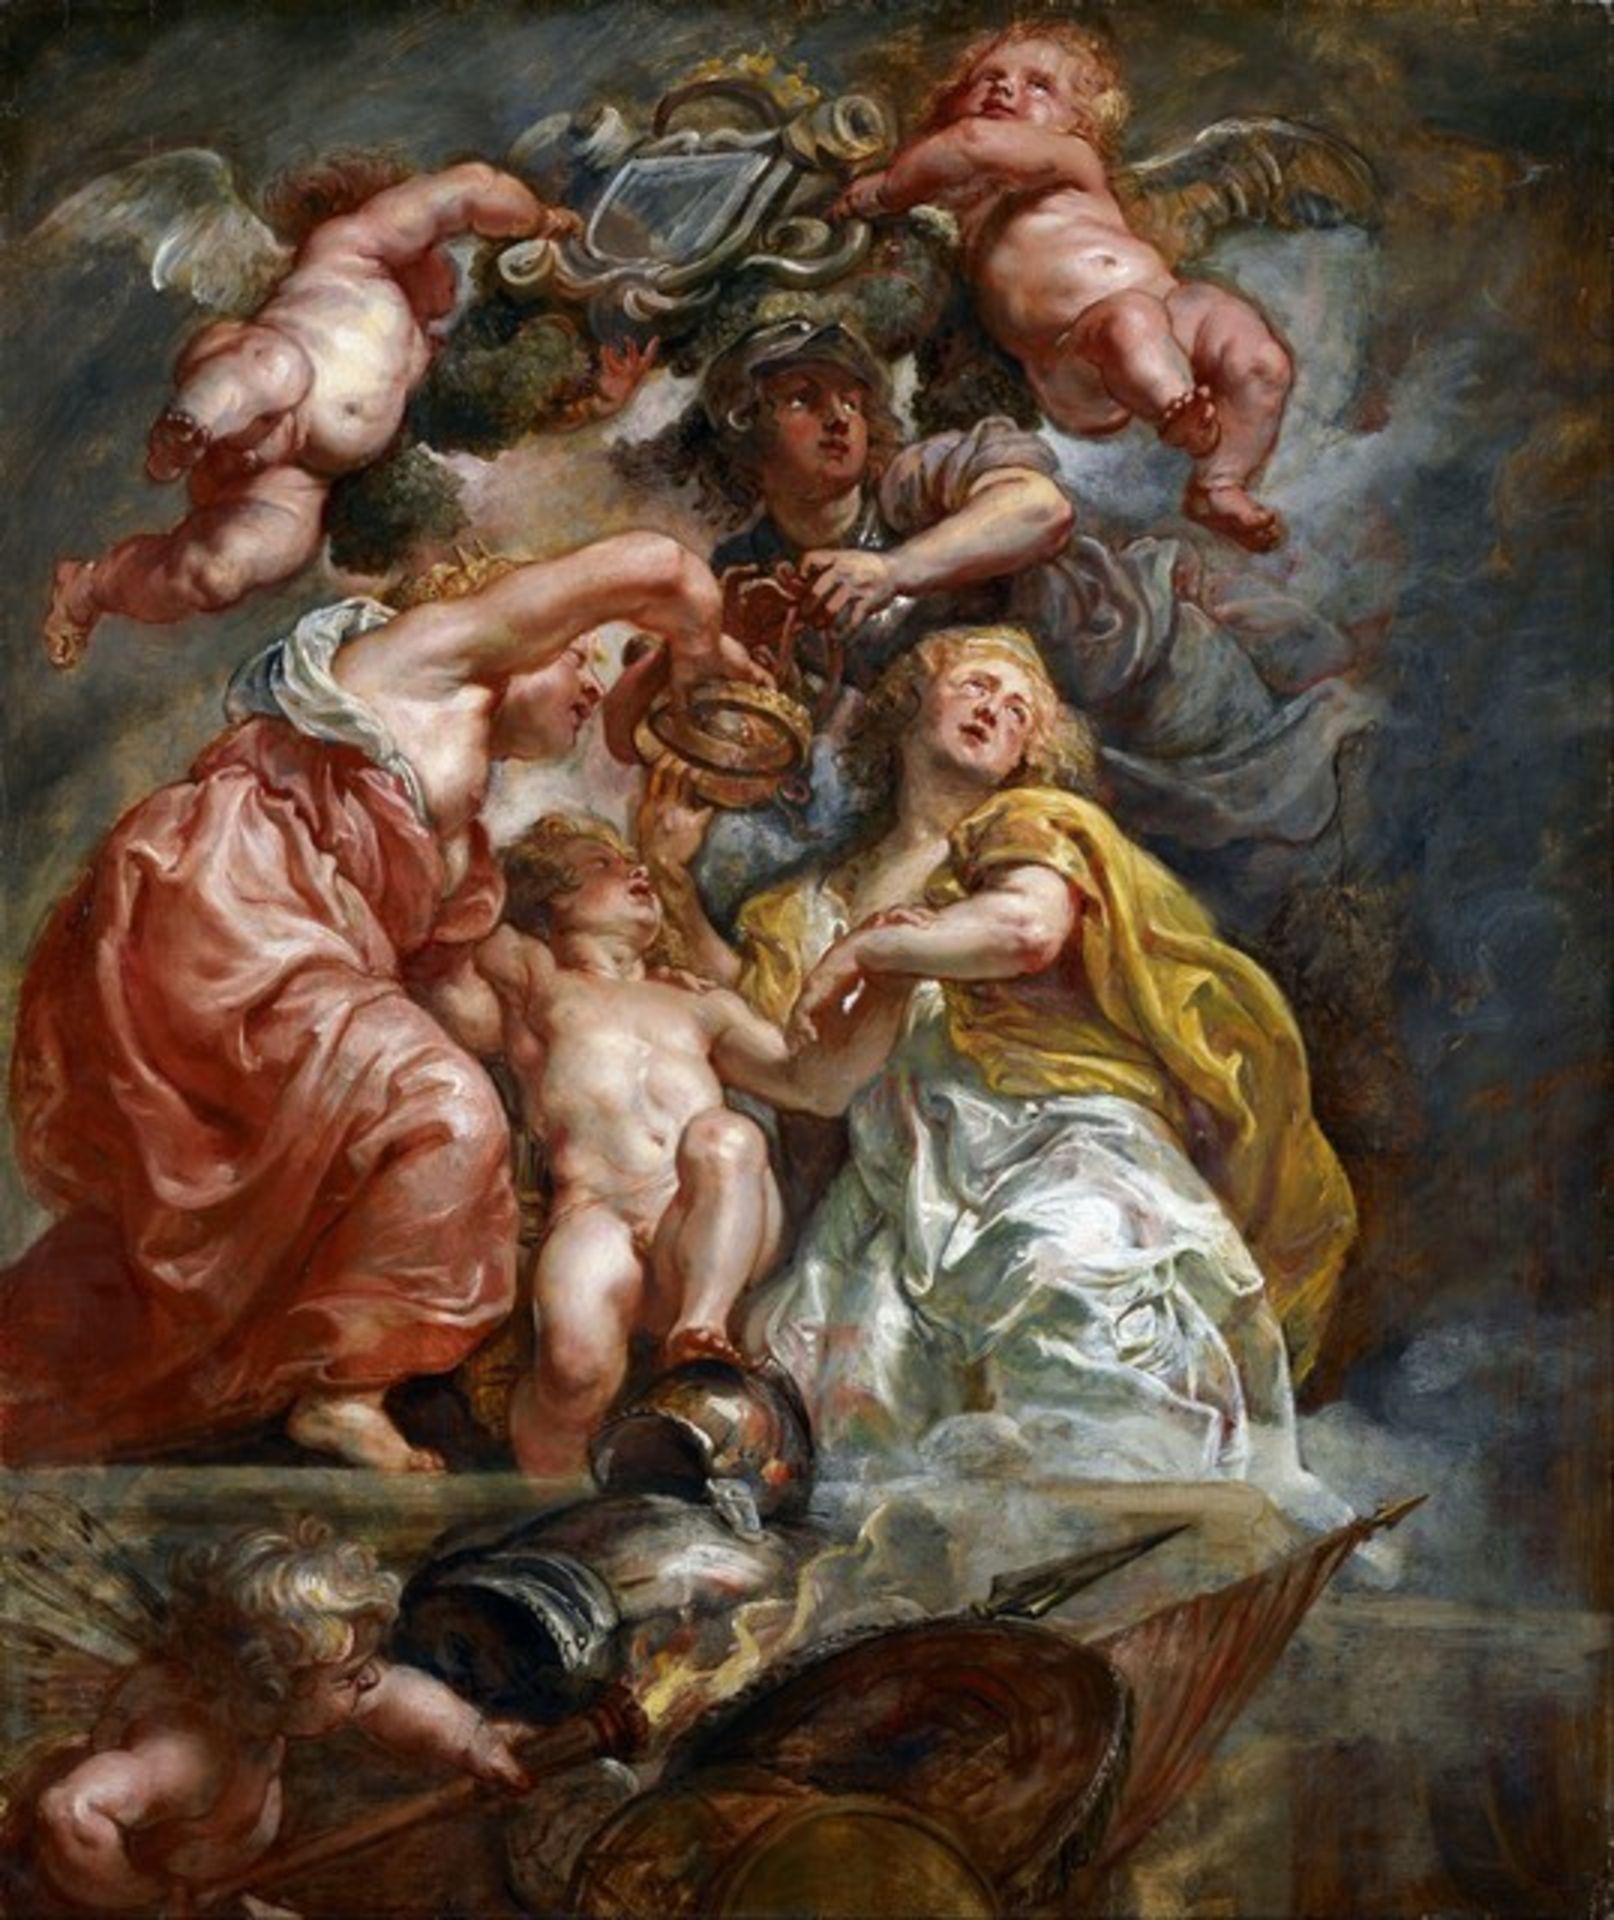 Sir Peter Paul Rubens - The Union of England and Scotland - Image 2 of 2